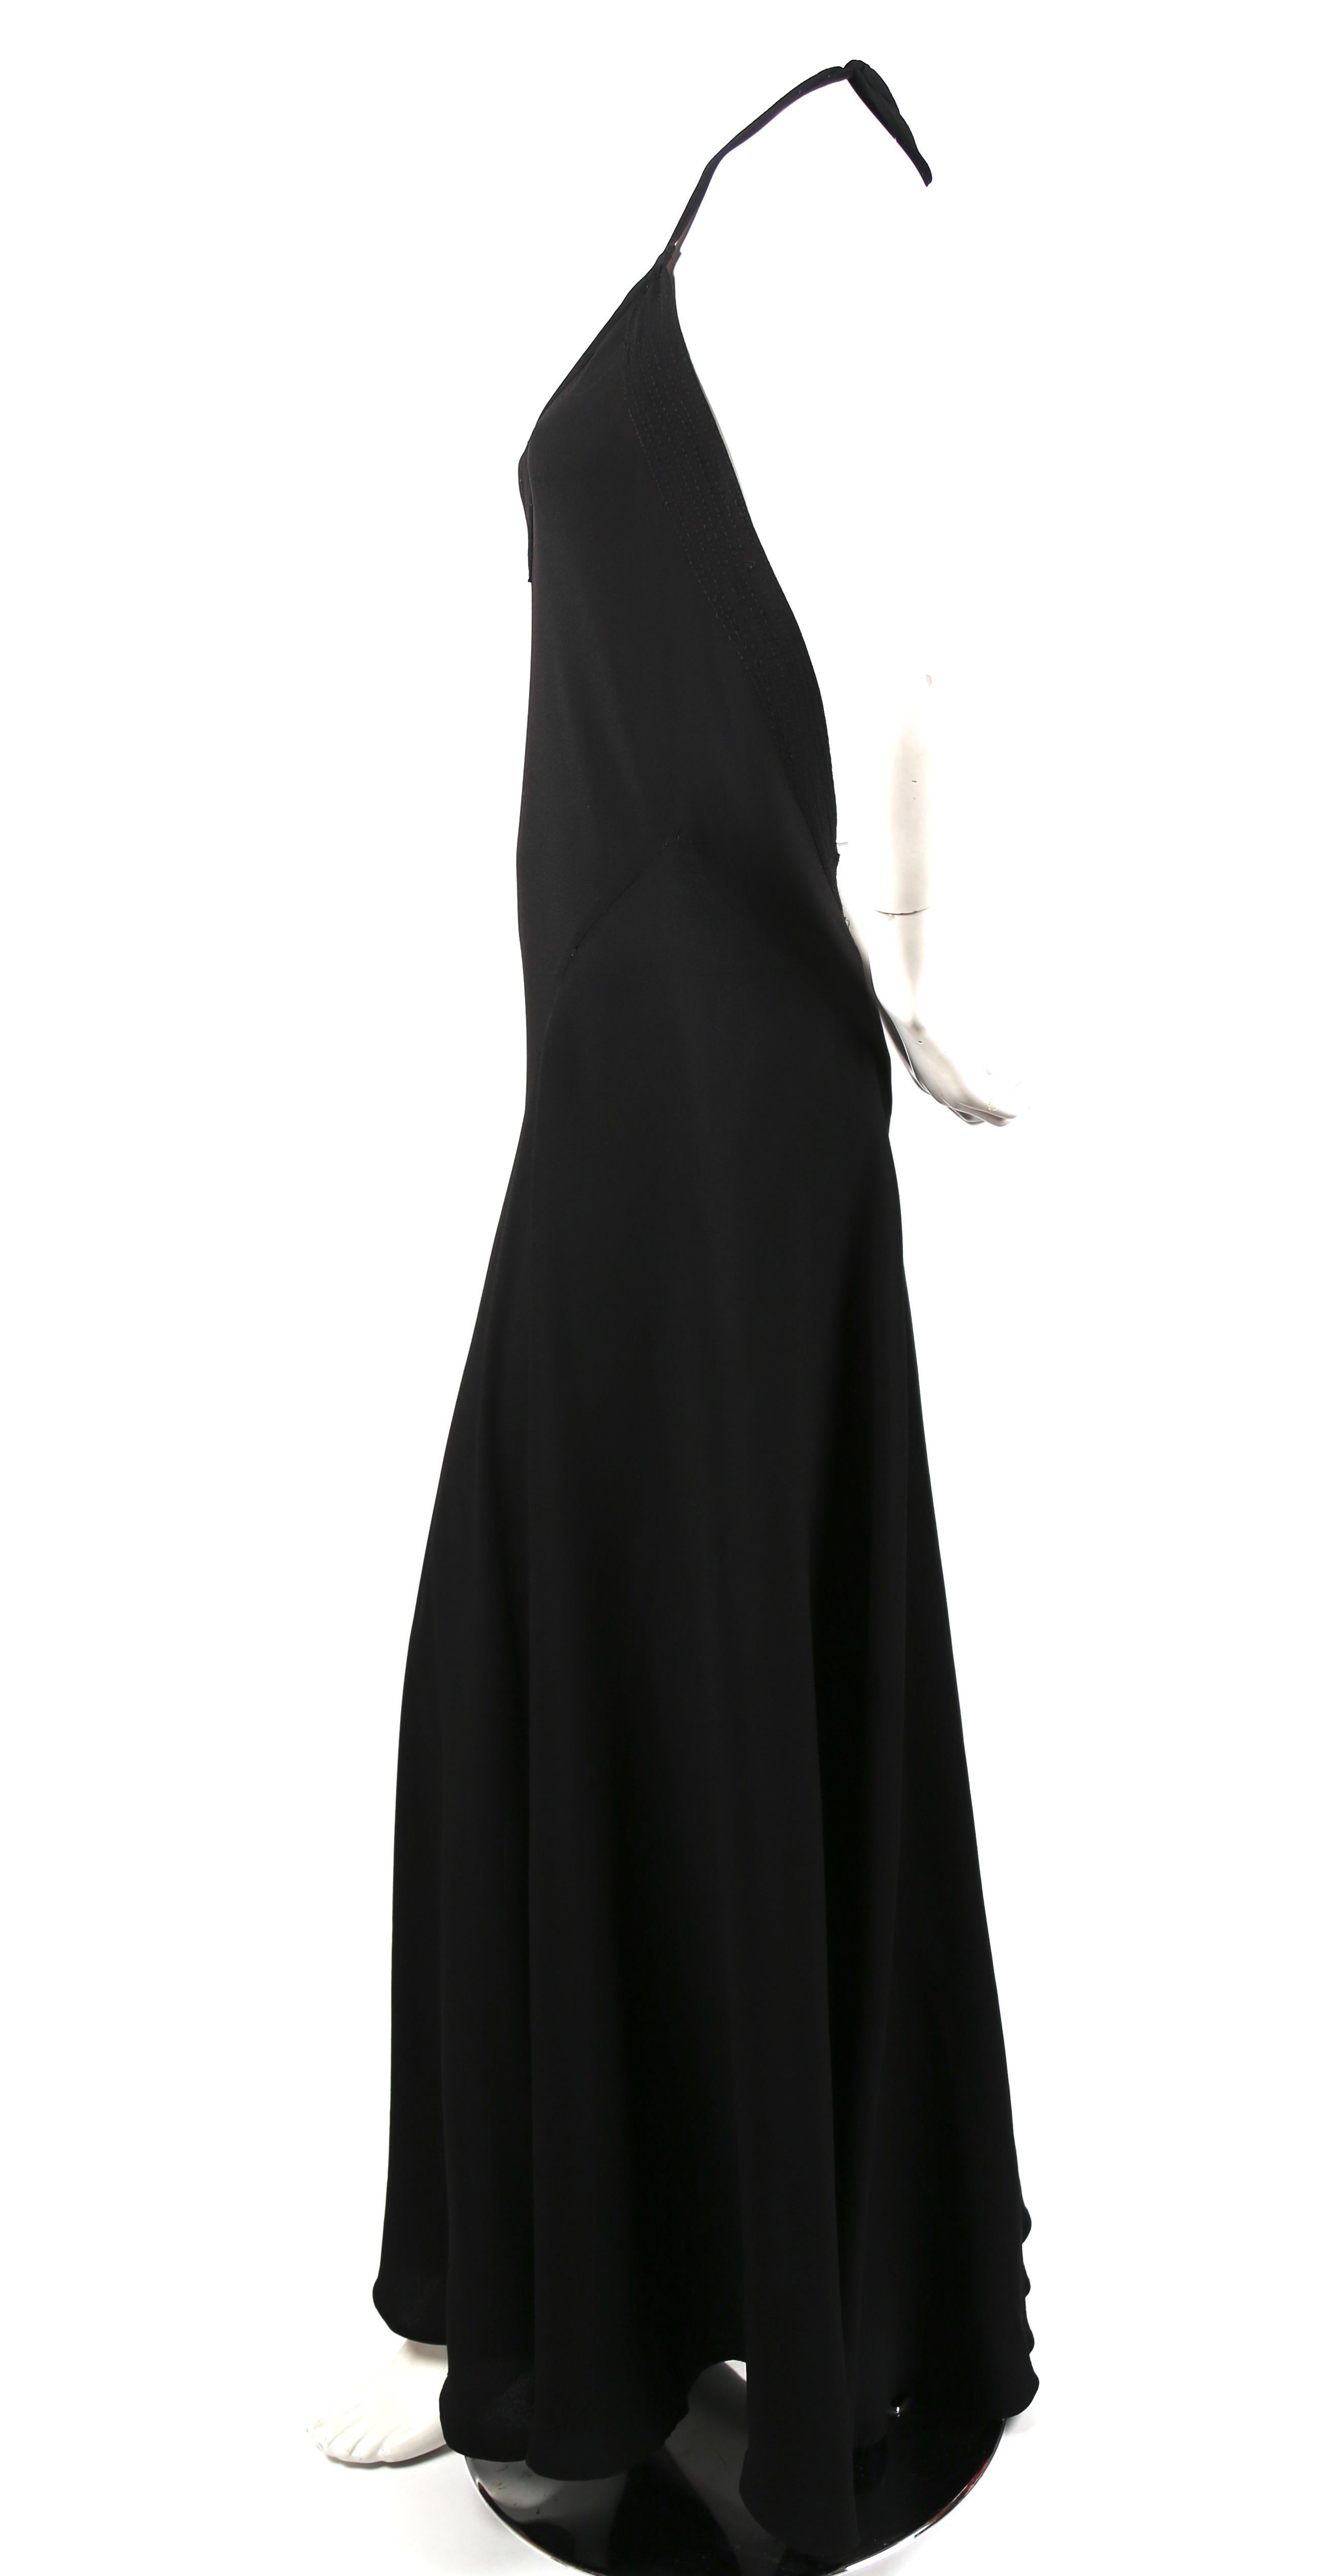 Jet-black, moss crepe, bias-cut maxi gown with deep-V front and back from Ossie Clark for Quorum. Beautiful, decorative top-stitching detail around bodice. Dress is labeled a UK 14 however this dress best fits a modern US 4-8. The dress was not